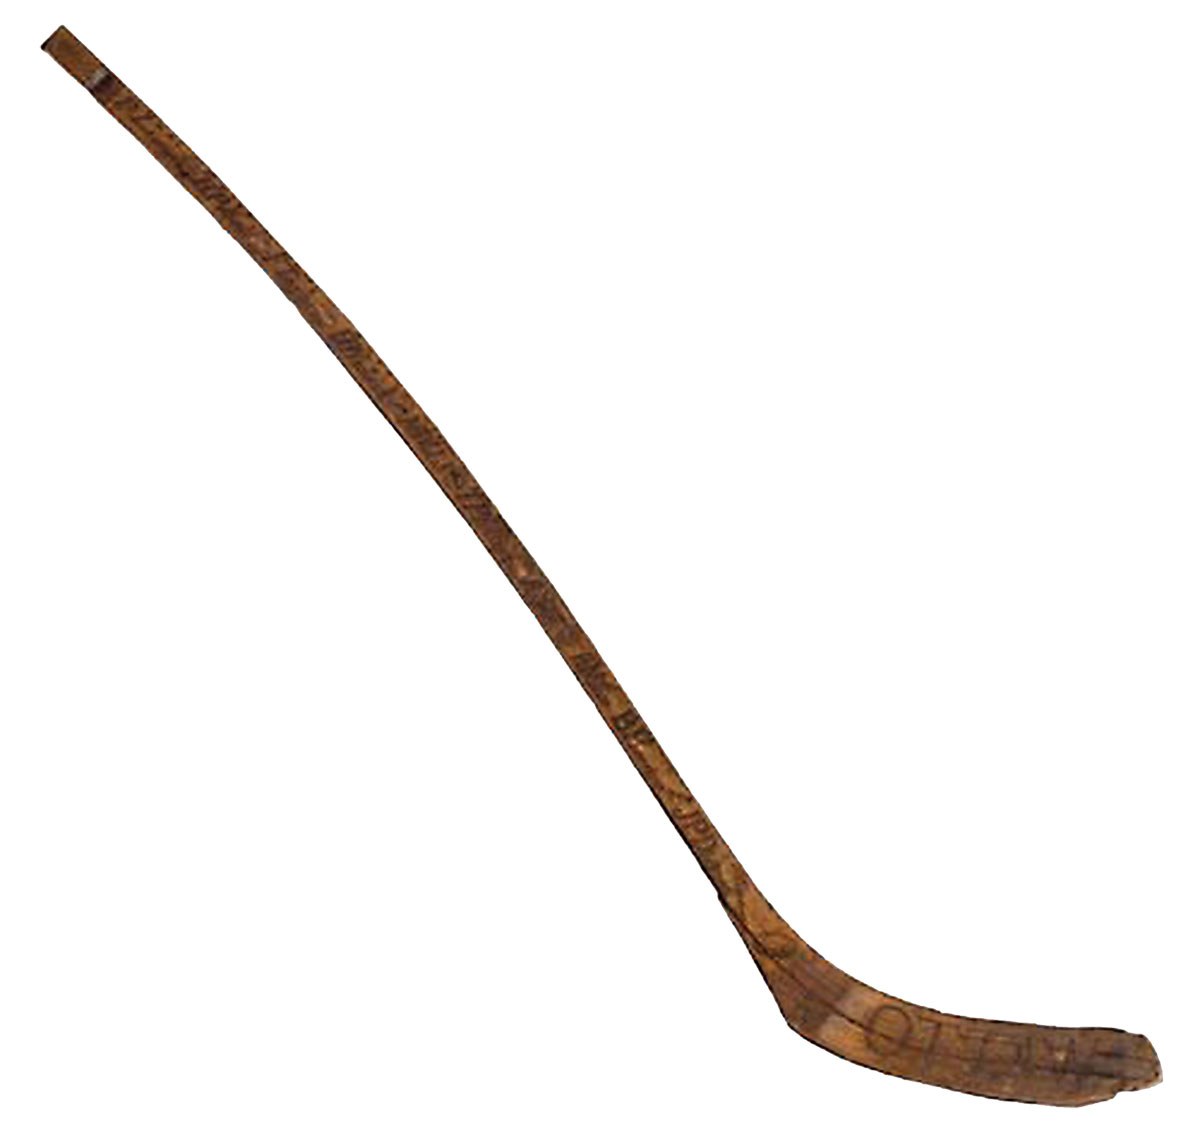 Hockey stick used by Cyclone Taylor during his first season as a member of the Ottawa Senators in 1907-08 (Photo courtesy of the Matthew Manor/Hockey Hall of Fame)